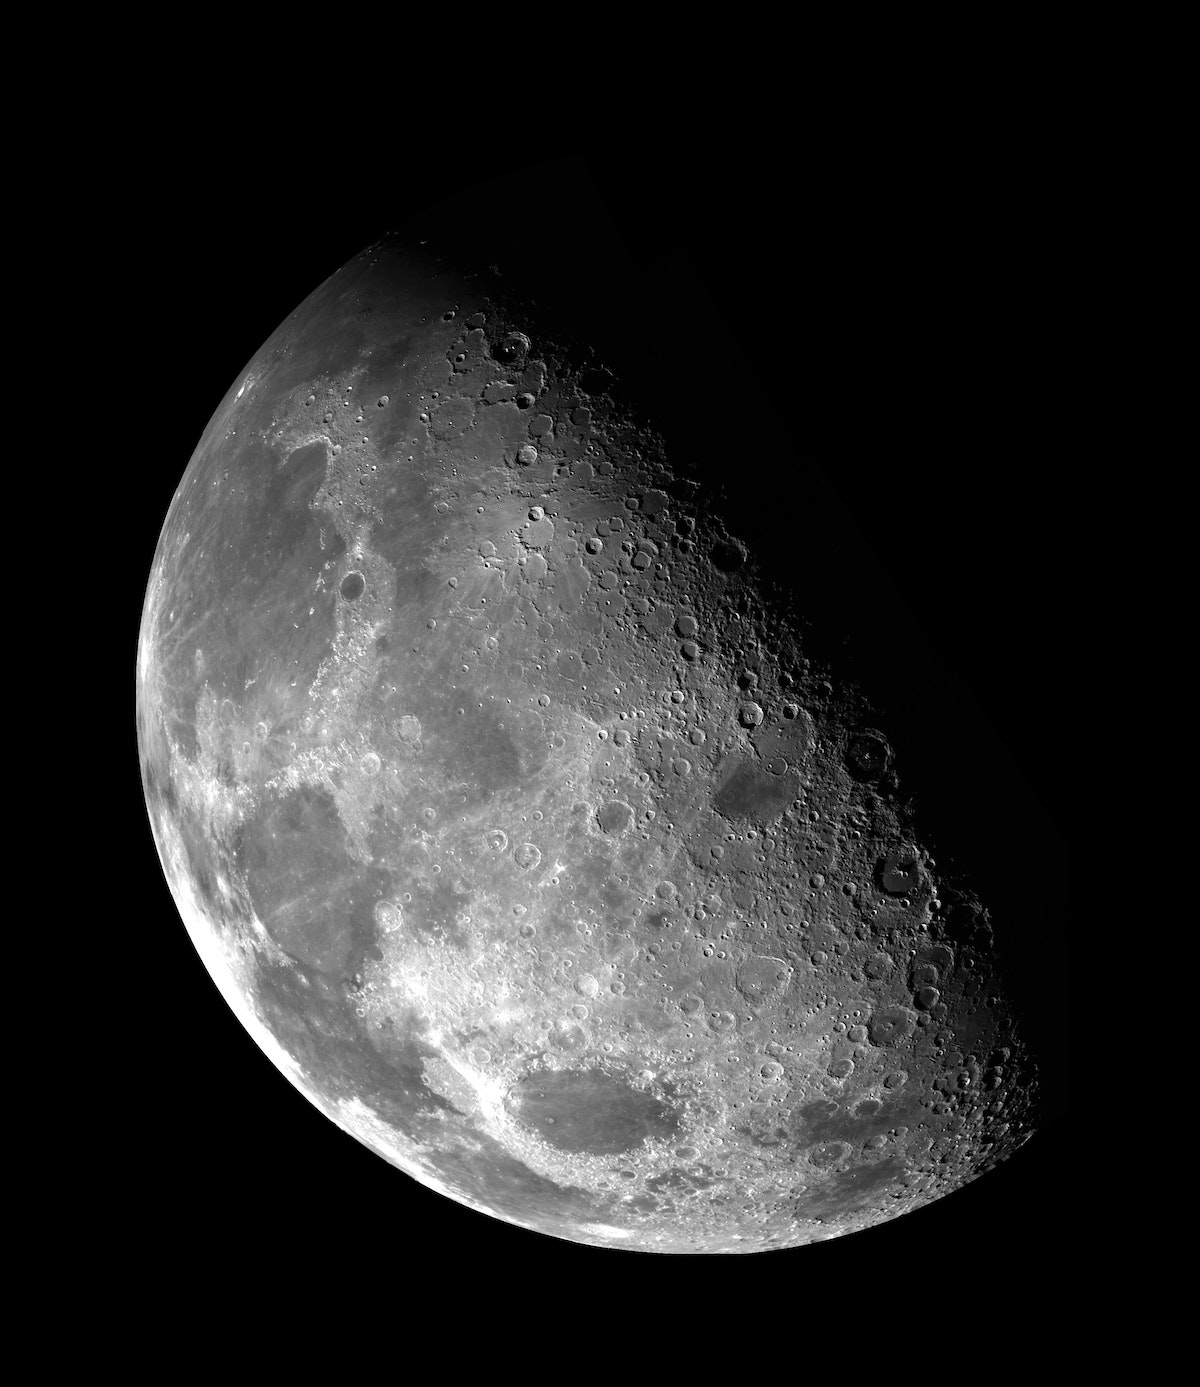 Lunar astronomy. Top 5 things to look for on the moon.